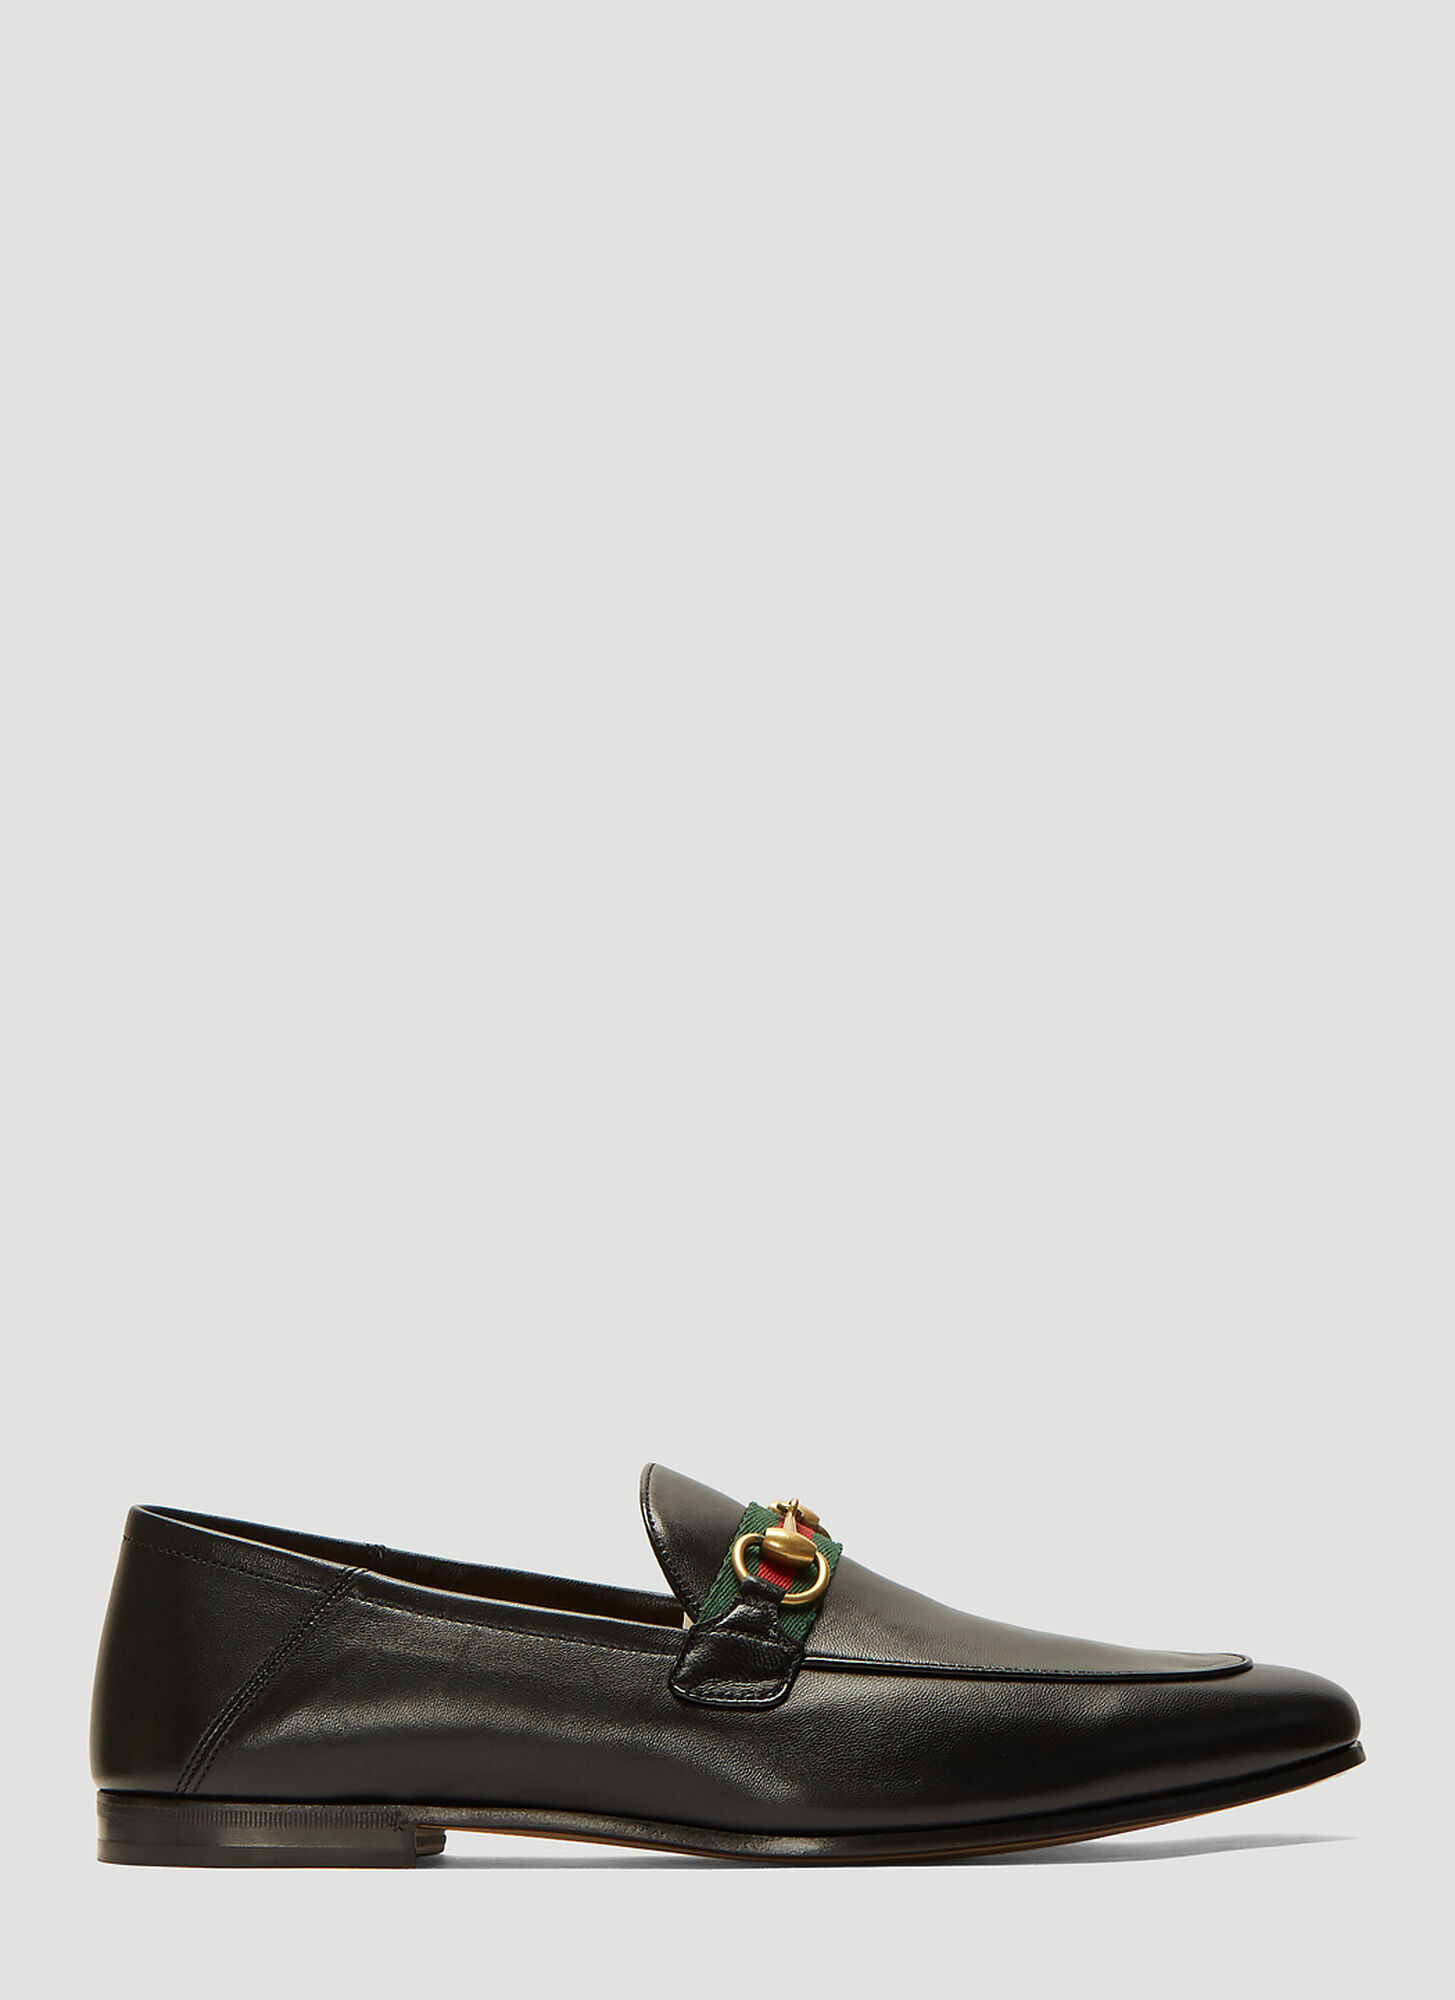 loafers uk